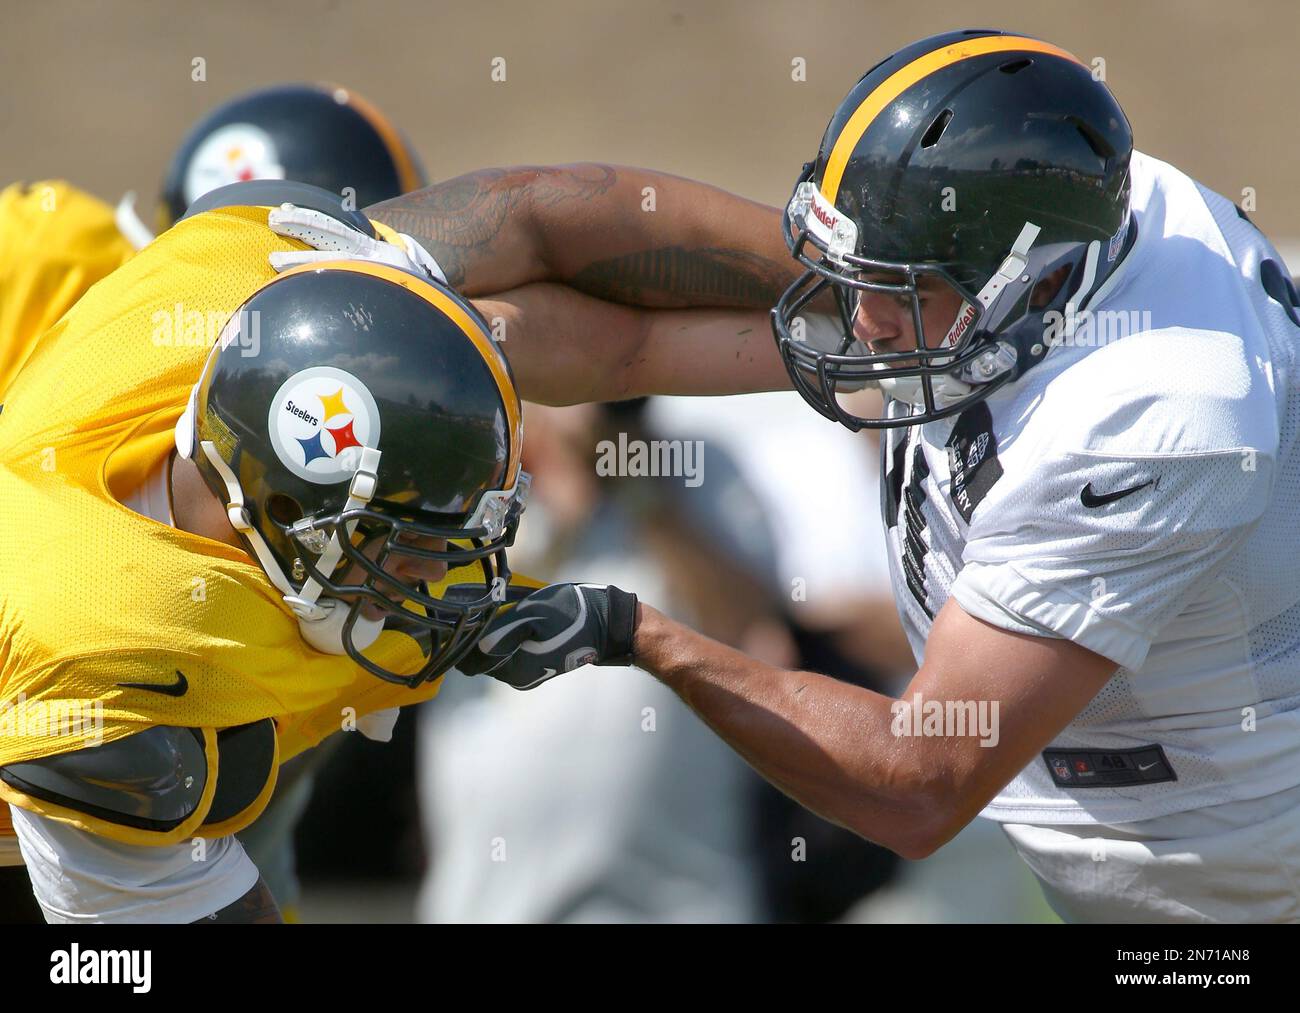 Pittsburgh Steelers tackle Guy Whimper, right, tries to block linebacker  LaMarr Woodley (56) during practice at NFL football training camp at the  team's training facility in Latrobe, Pa., on Thursday, Aug. 1,